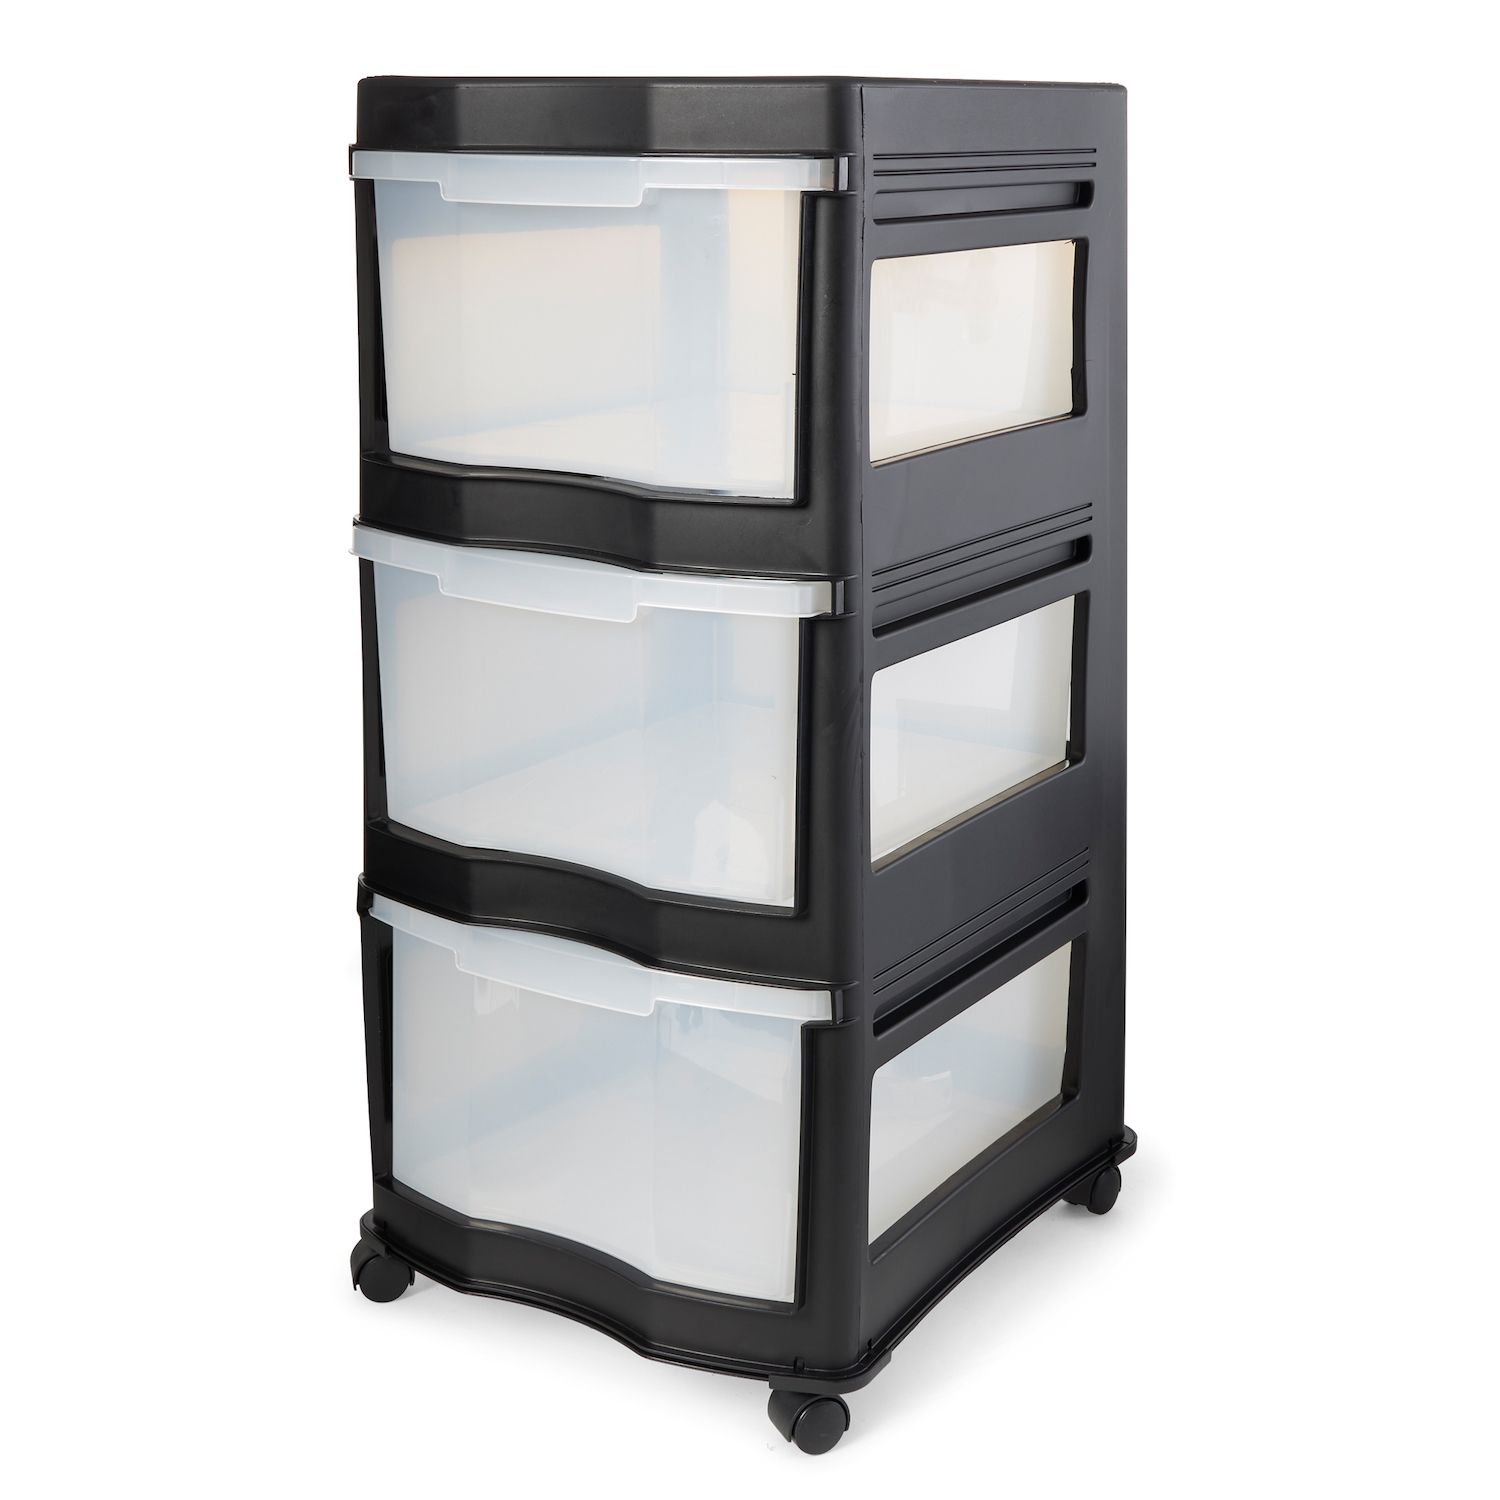 Simplify 3 Tier Storage Drawers with Side Pockets - Black